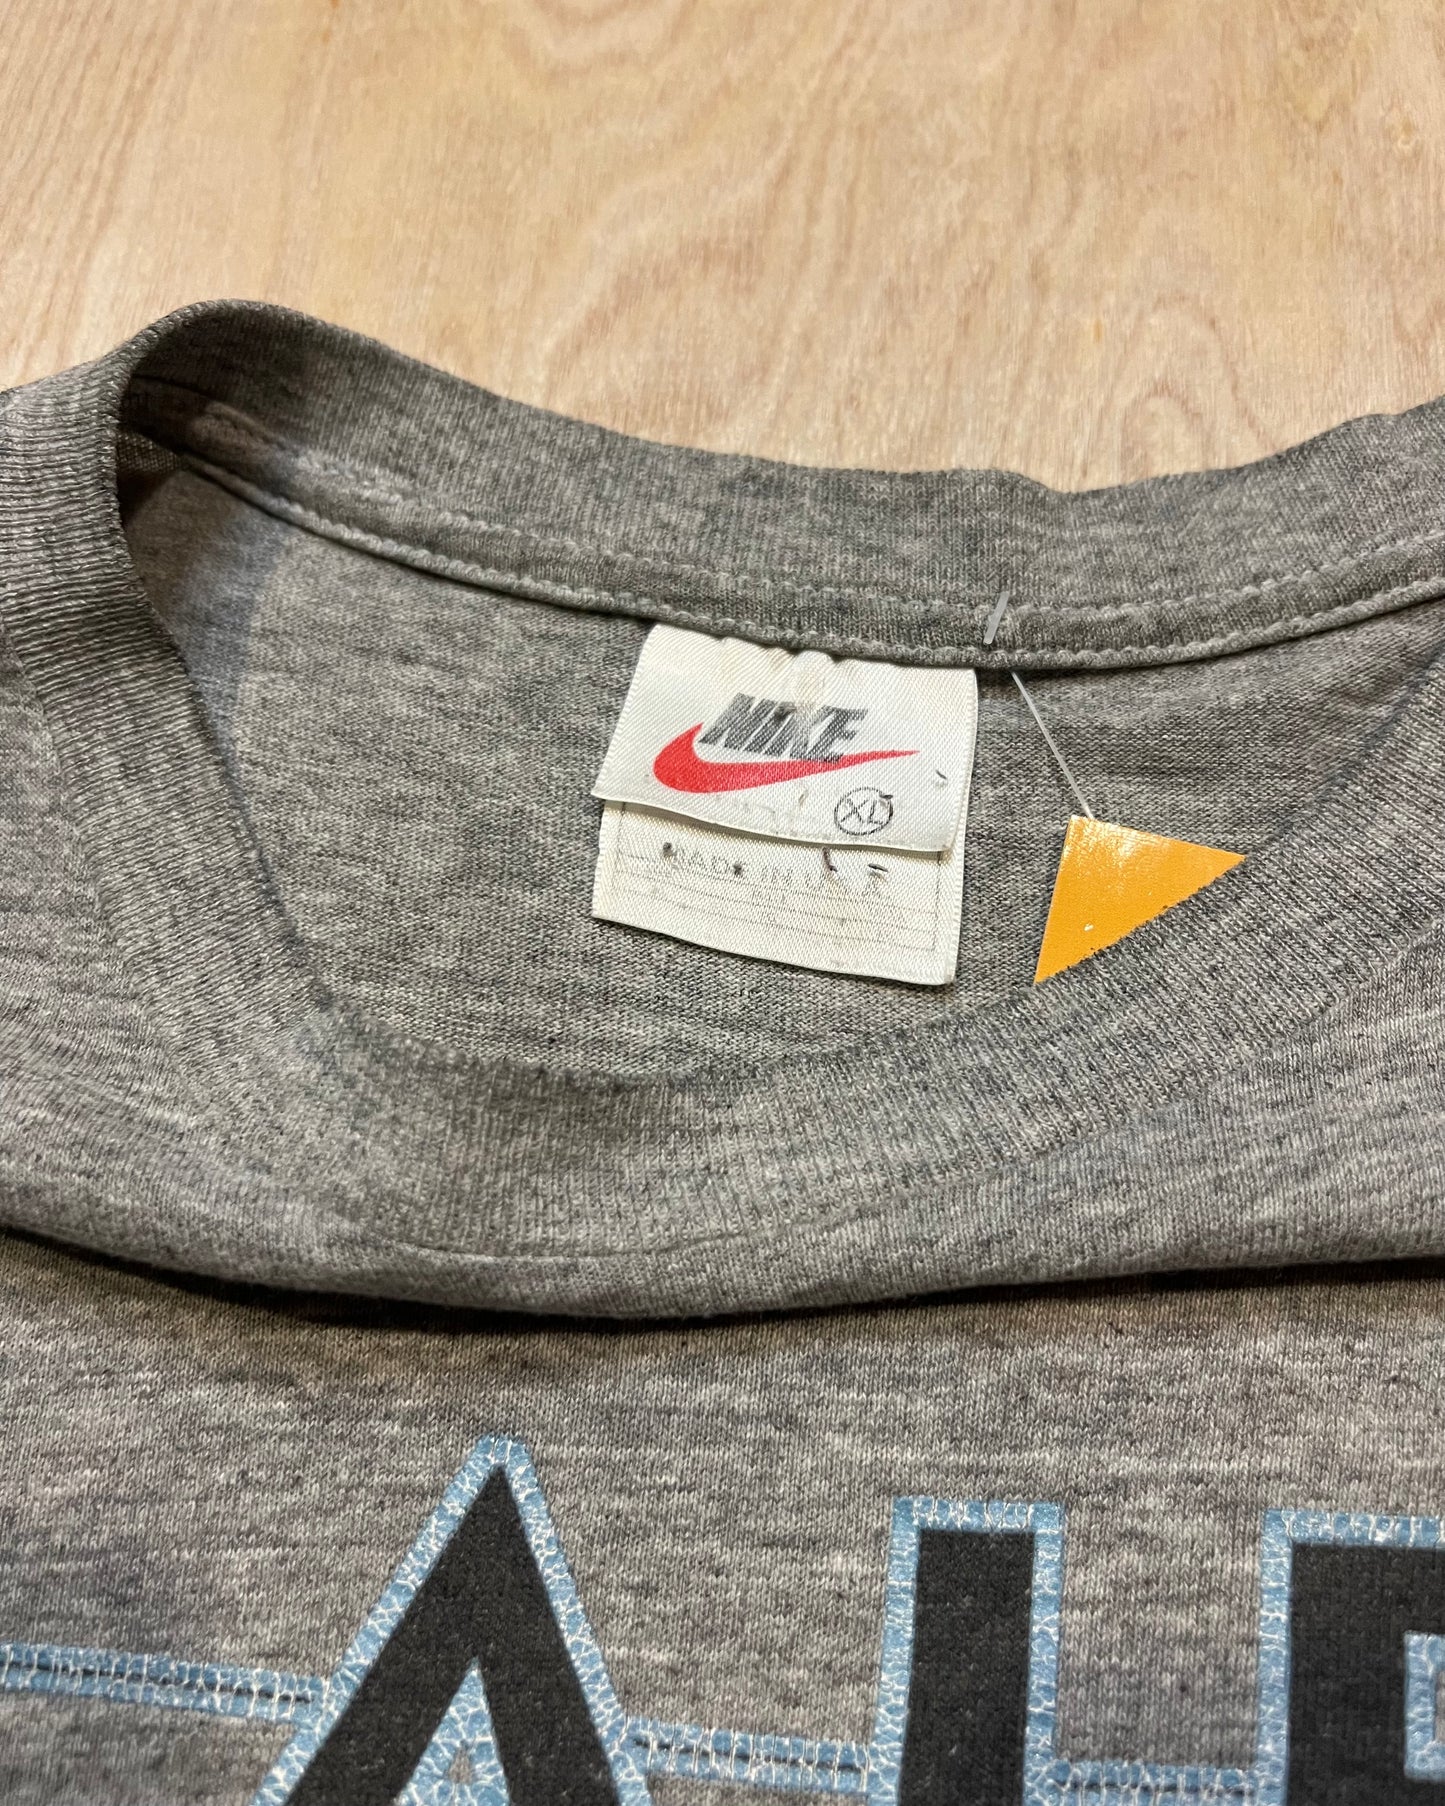 90's Nike Air Made in the USA T-Shirt